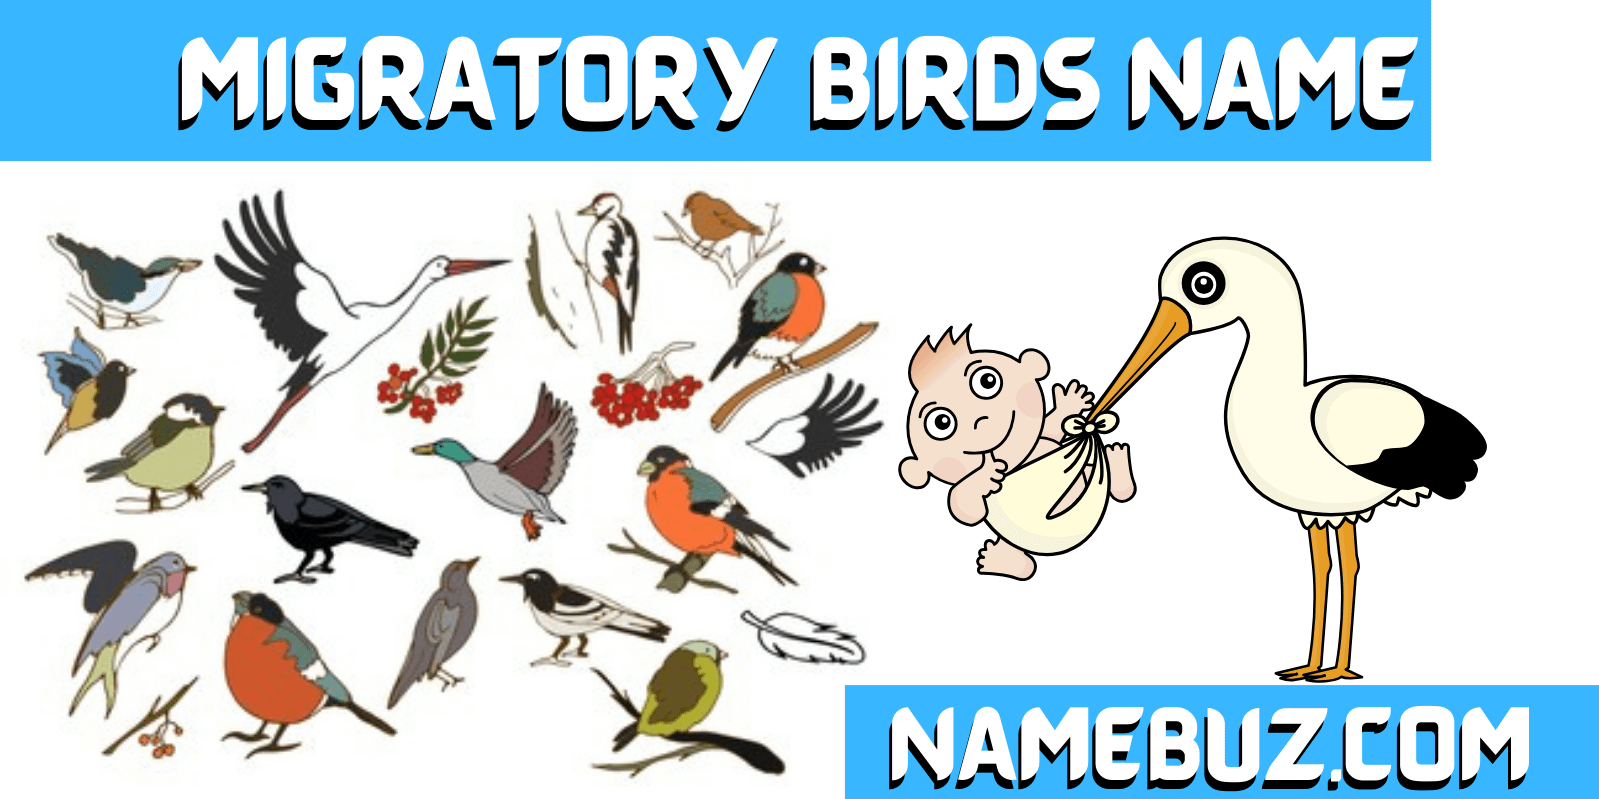 Migratory birds name picture